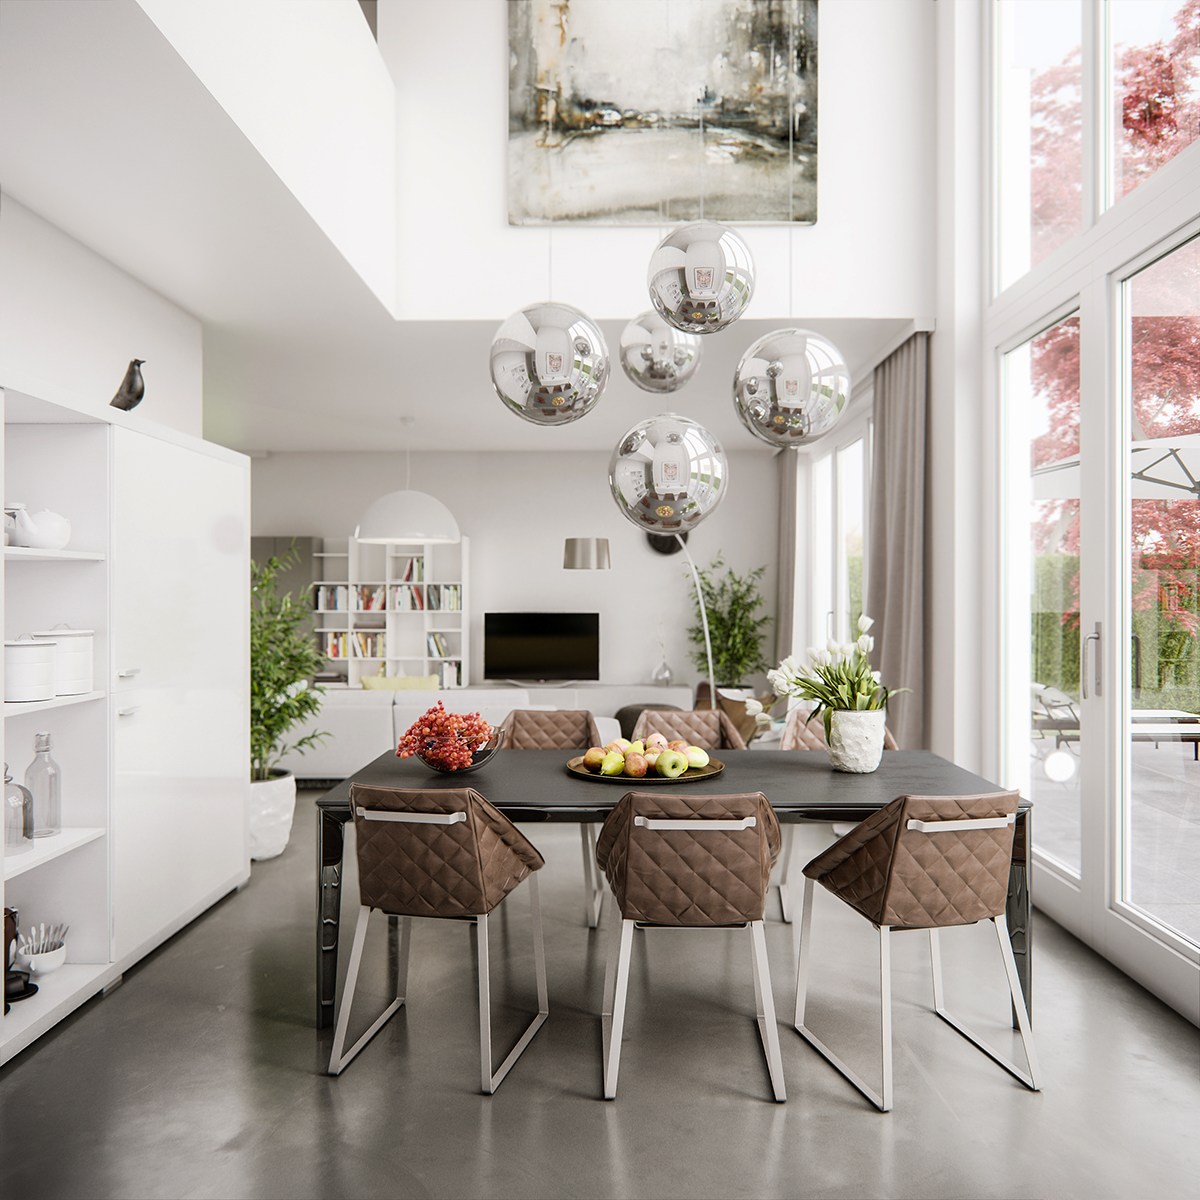 Modern Living Room Dining Design: A Perfect Blend Of Style And Functionality